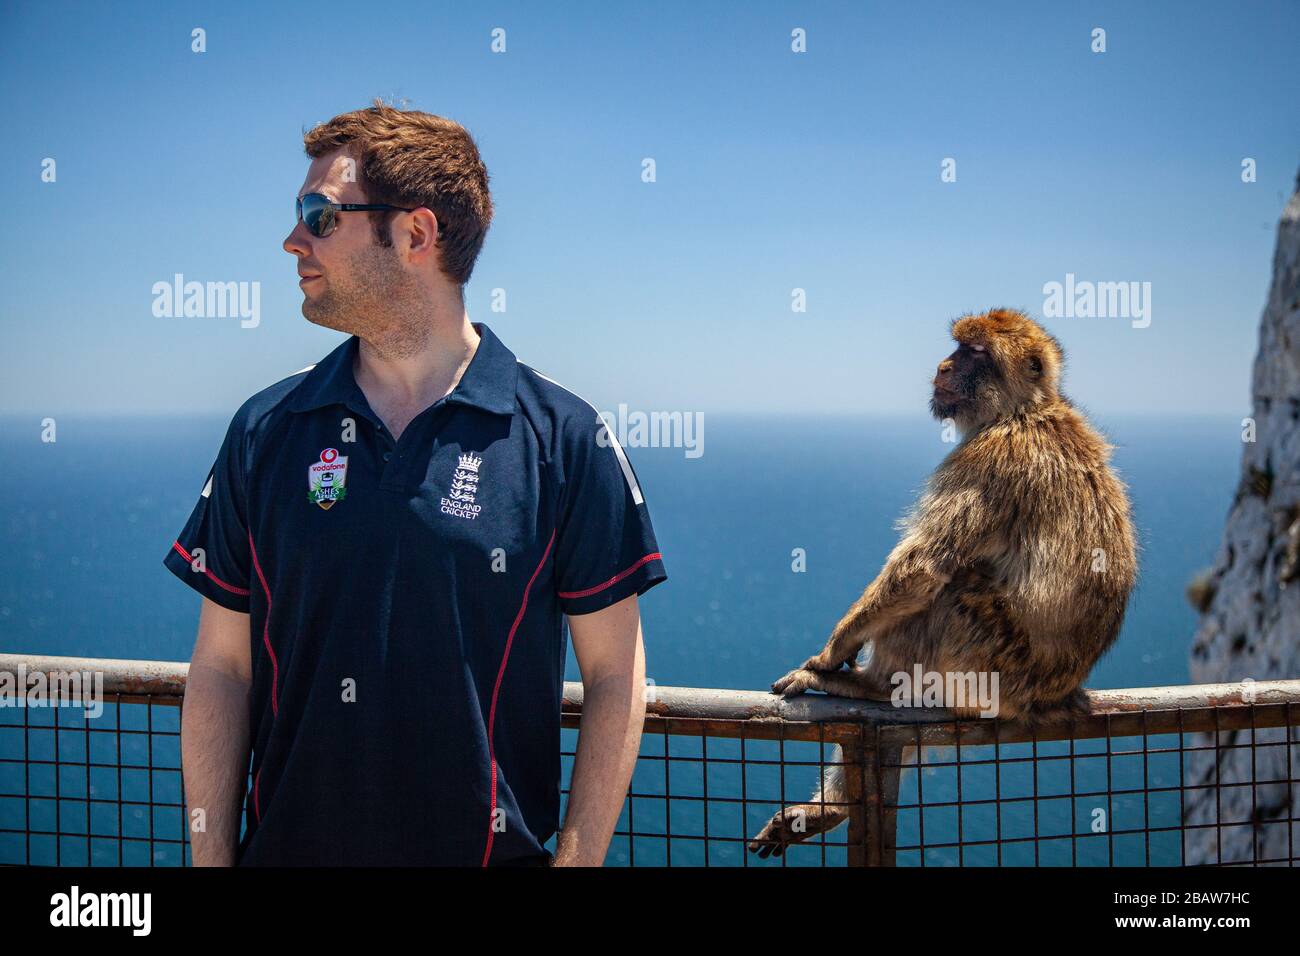 A man with his back to a barbary ape (Macaca sylvanus) at the Top of the Rock, Gibraltar Stock Photo